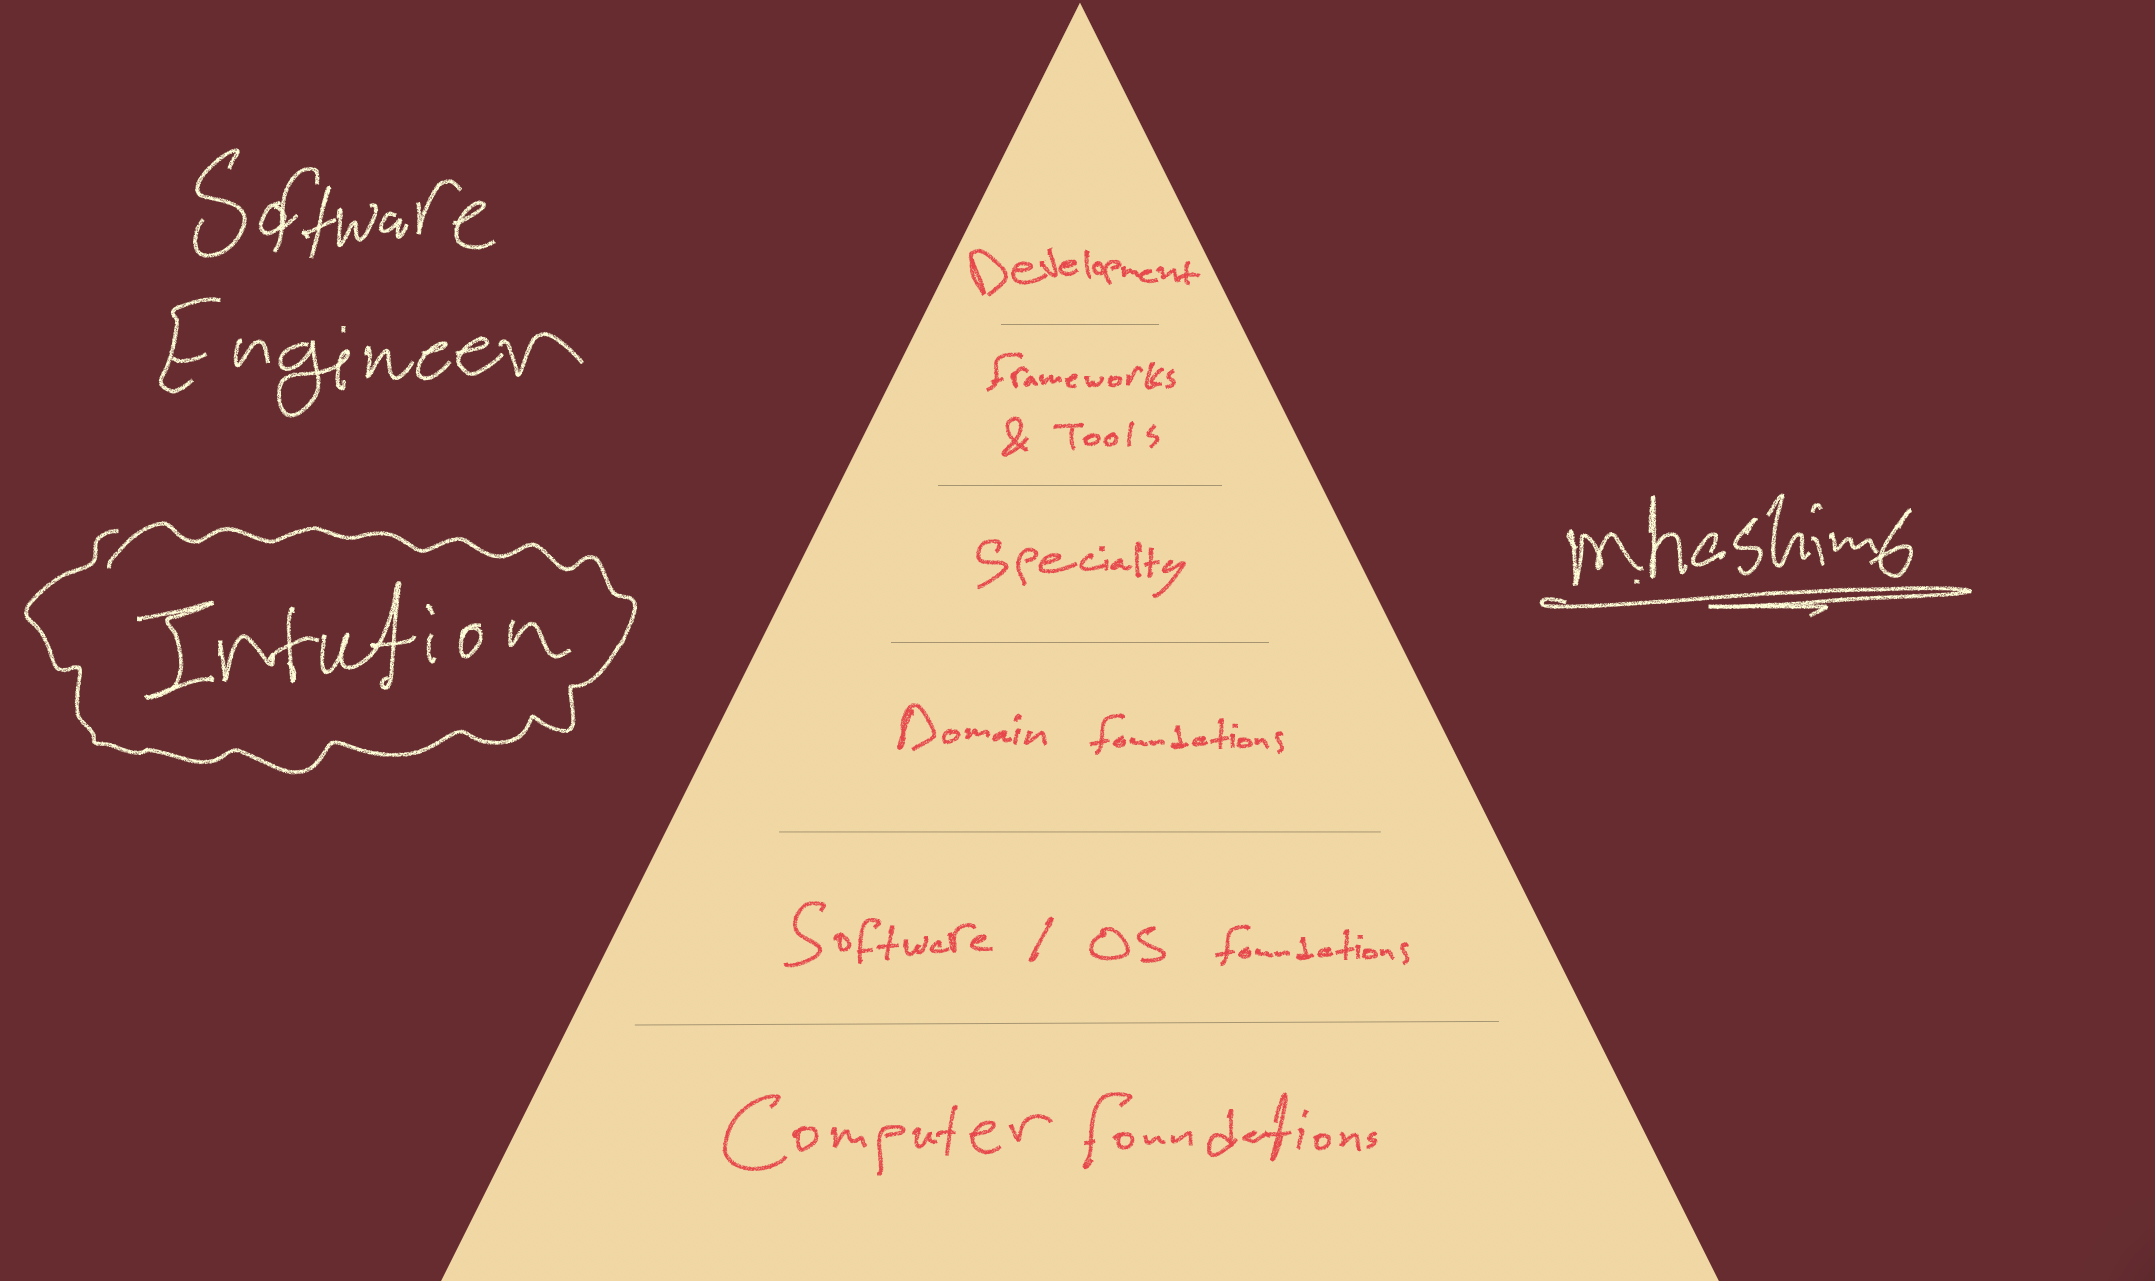 Software Engineer Intuition Building Pyramid by mhashim6